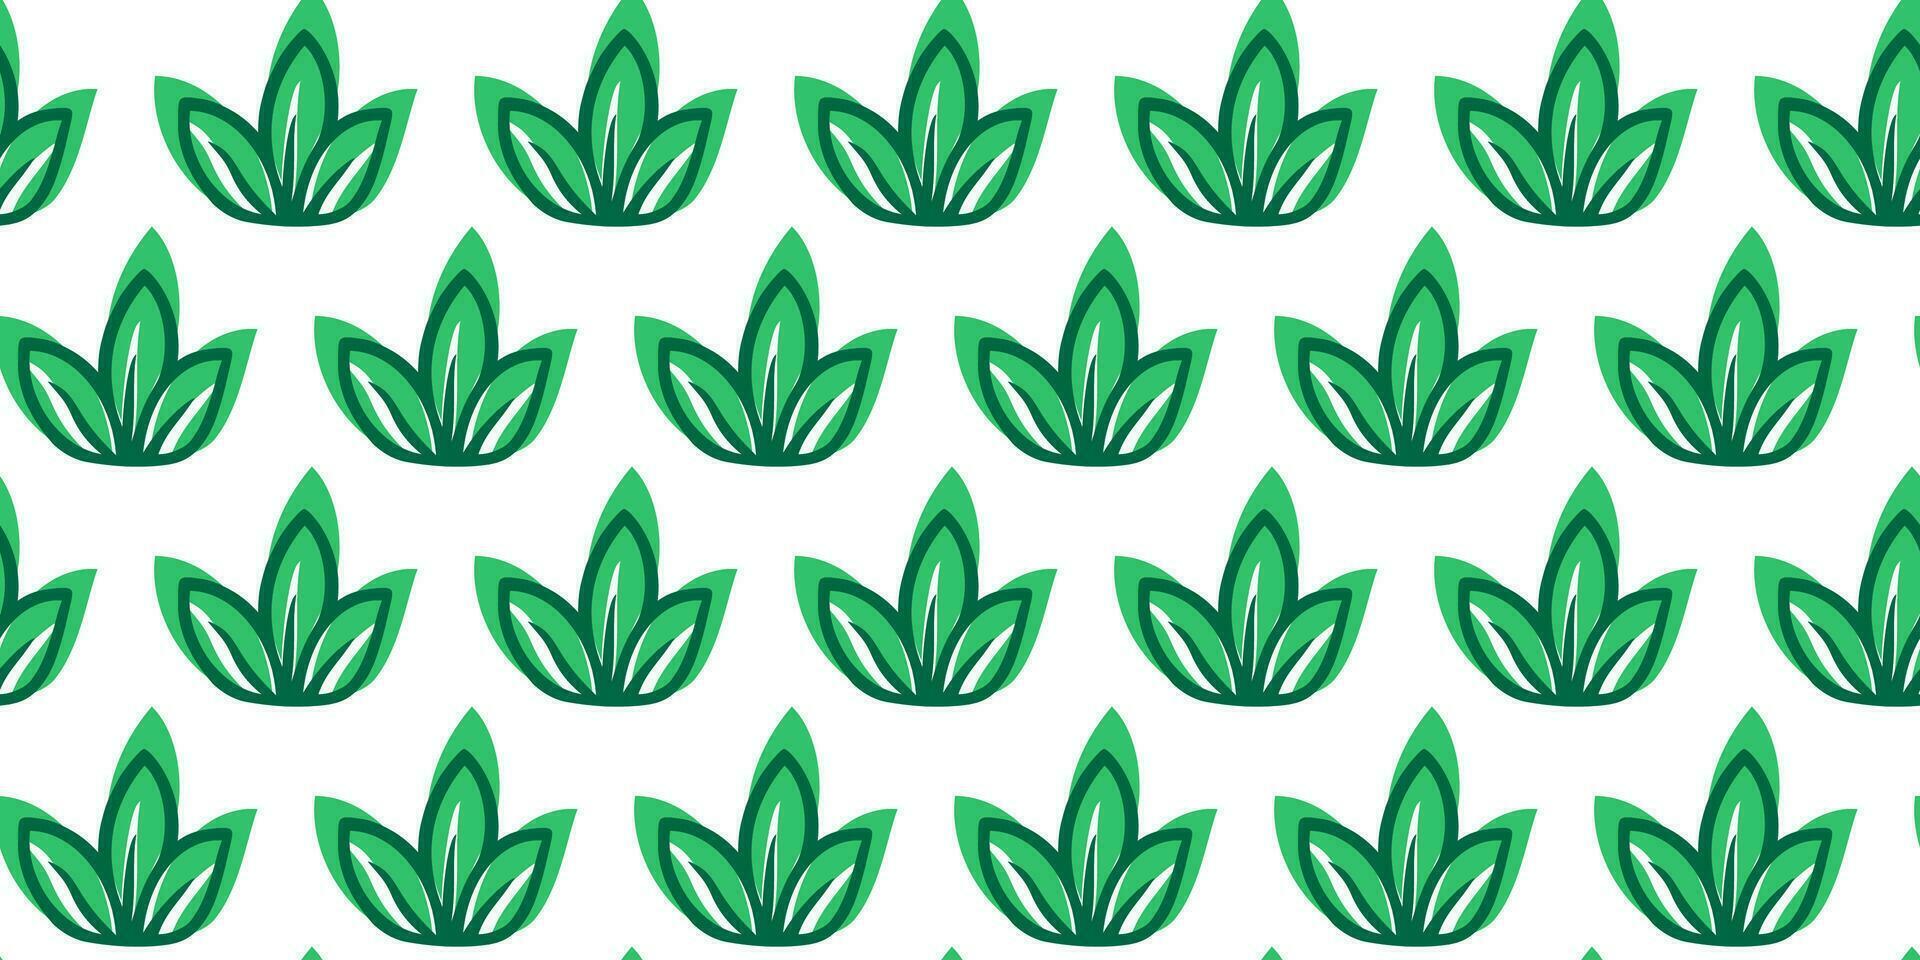 Green Fresh Grass Seamless Pattern. Vector Doodle Plant Background. Spring Microgreens Wallpaper. Microgreen Design for Wrapping Paper or Fabric Swatch